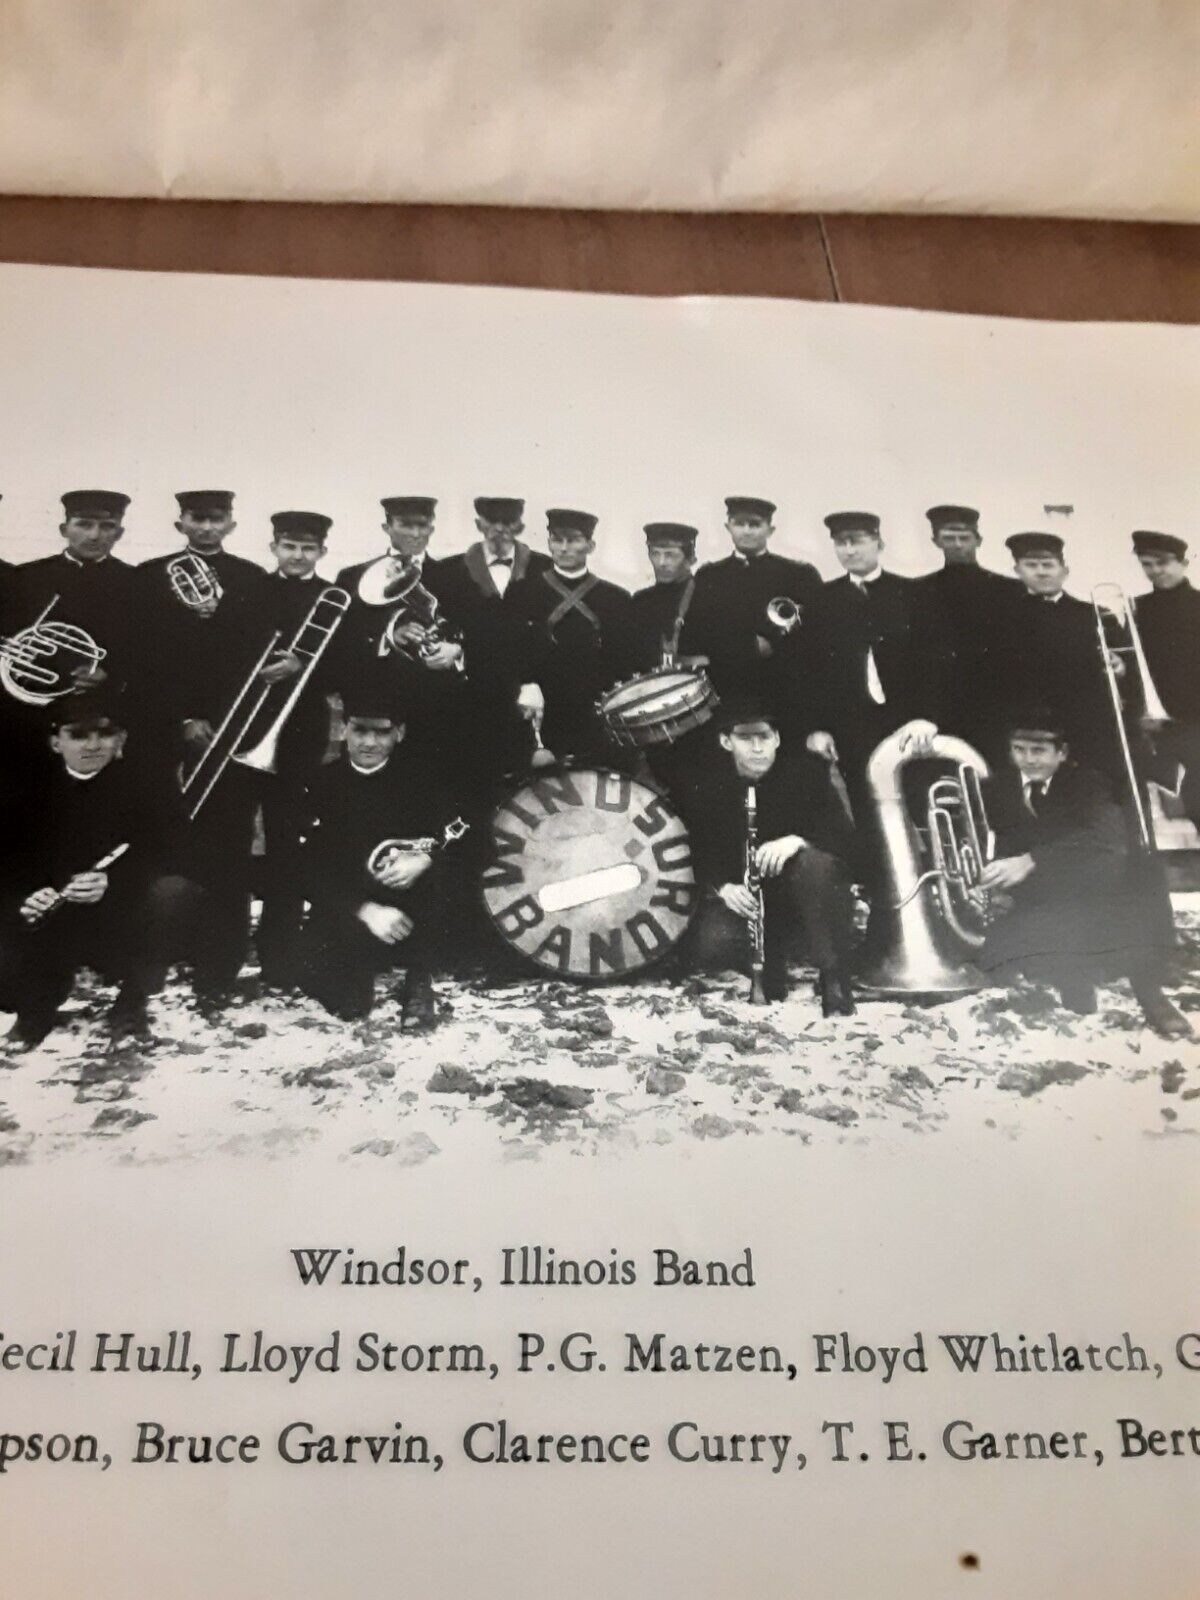 Windsor Illinois Band Reproduction Photo Taken From Original Postcard